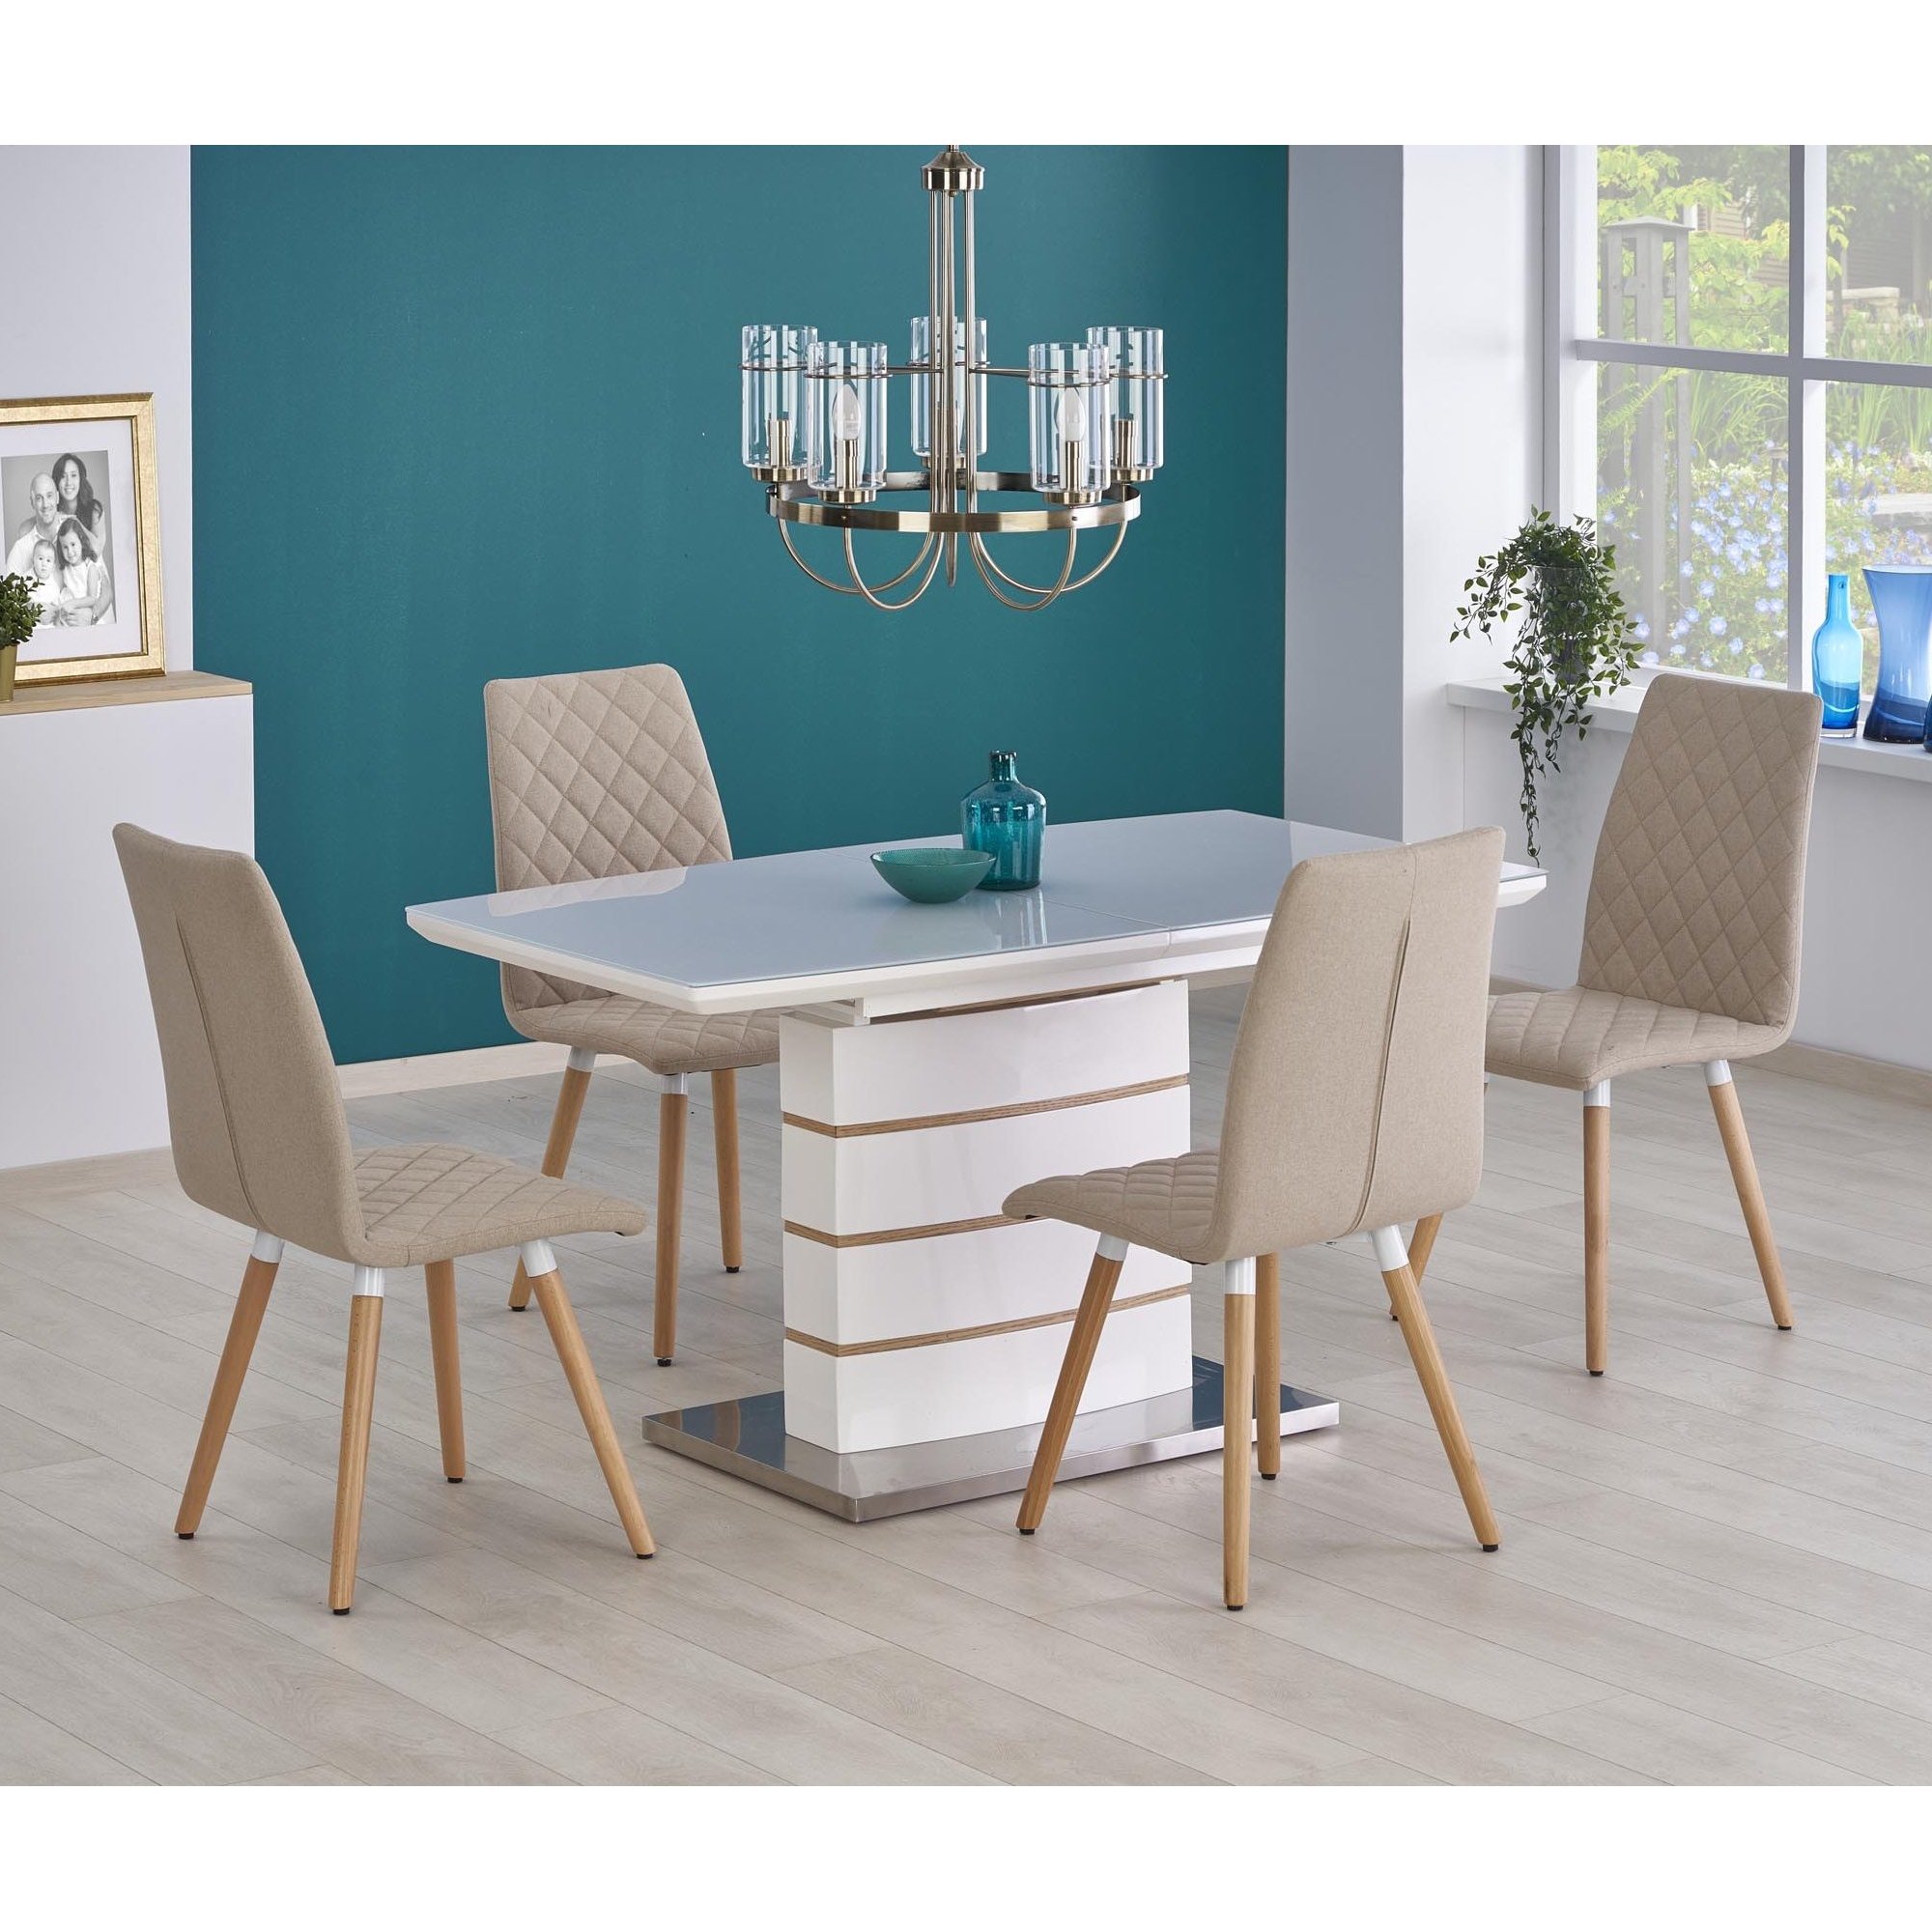 Toronto Lacquered Extension Dining Table Extension Dining Tables